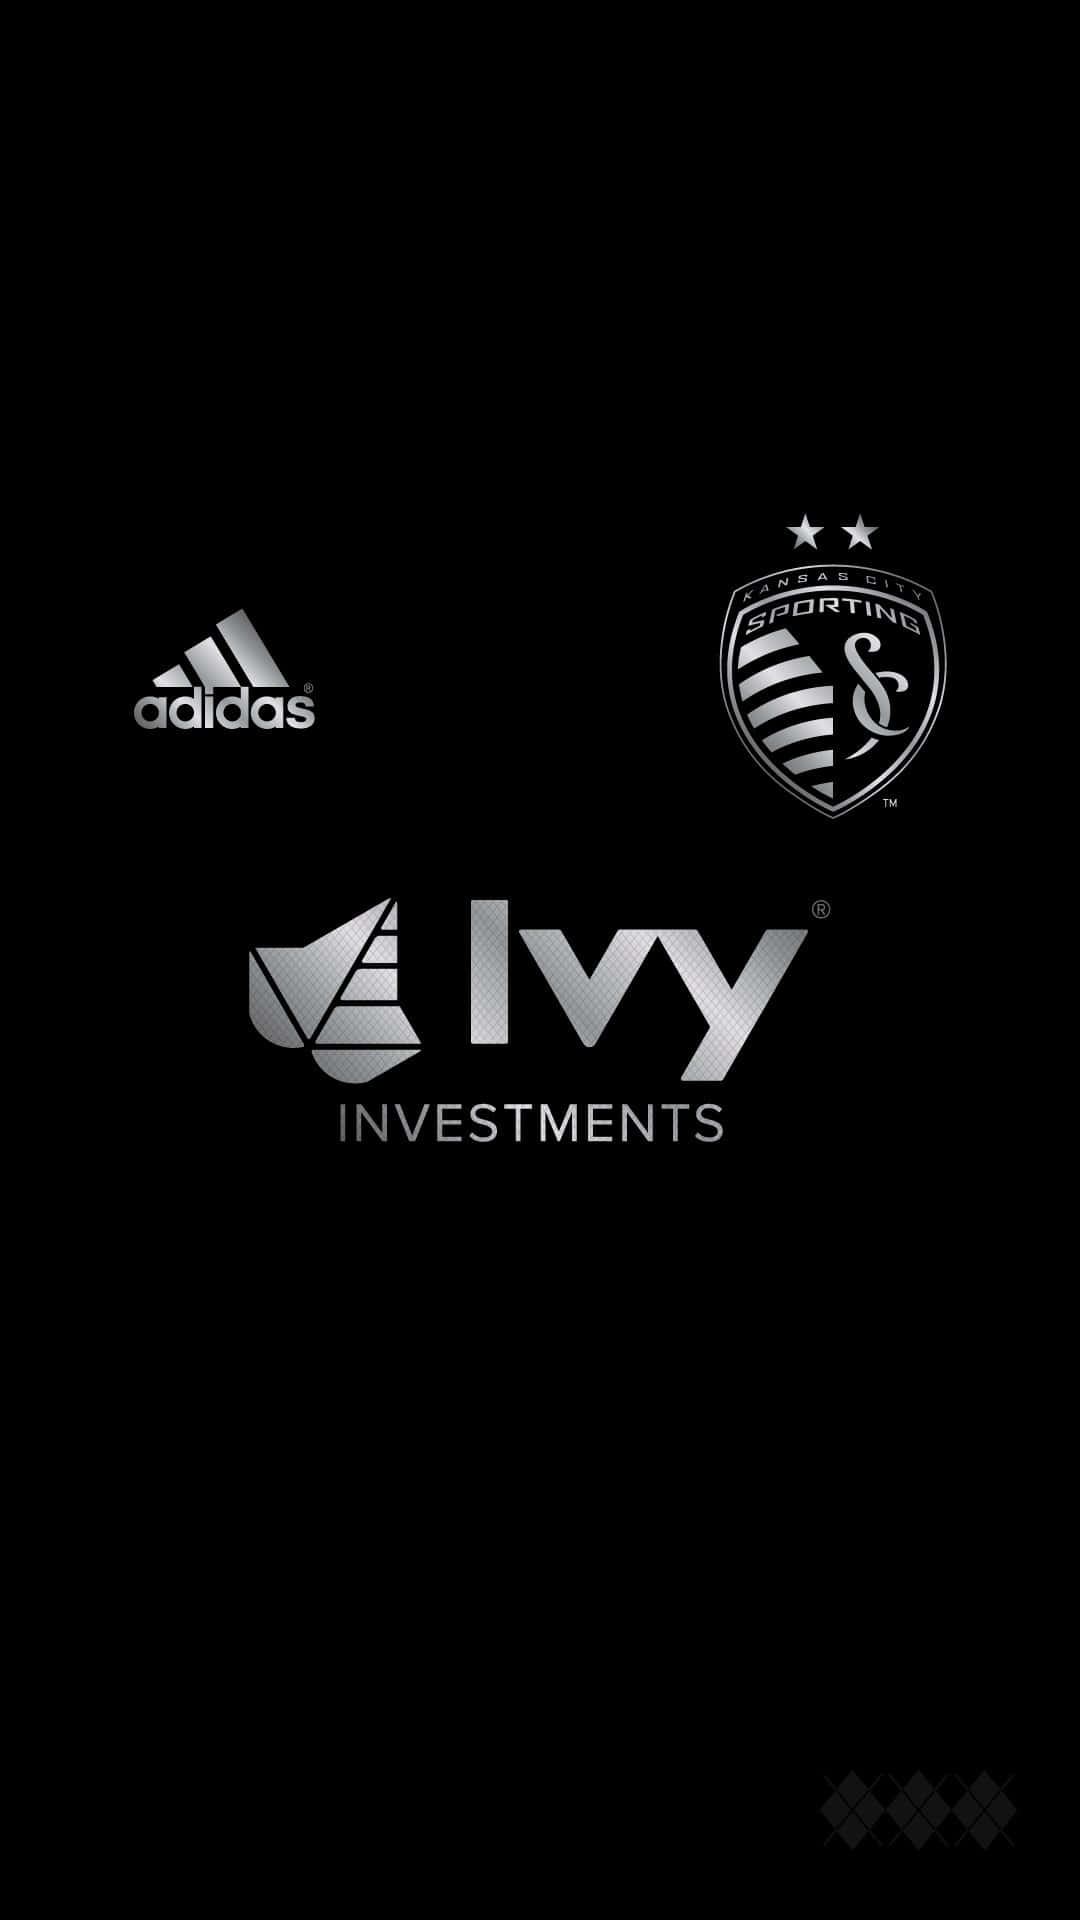 Sporting Kansas City Logo With Adidas And Ivy Investments Wallpaper